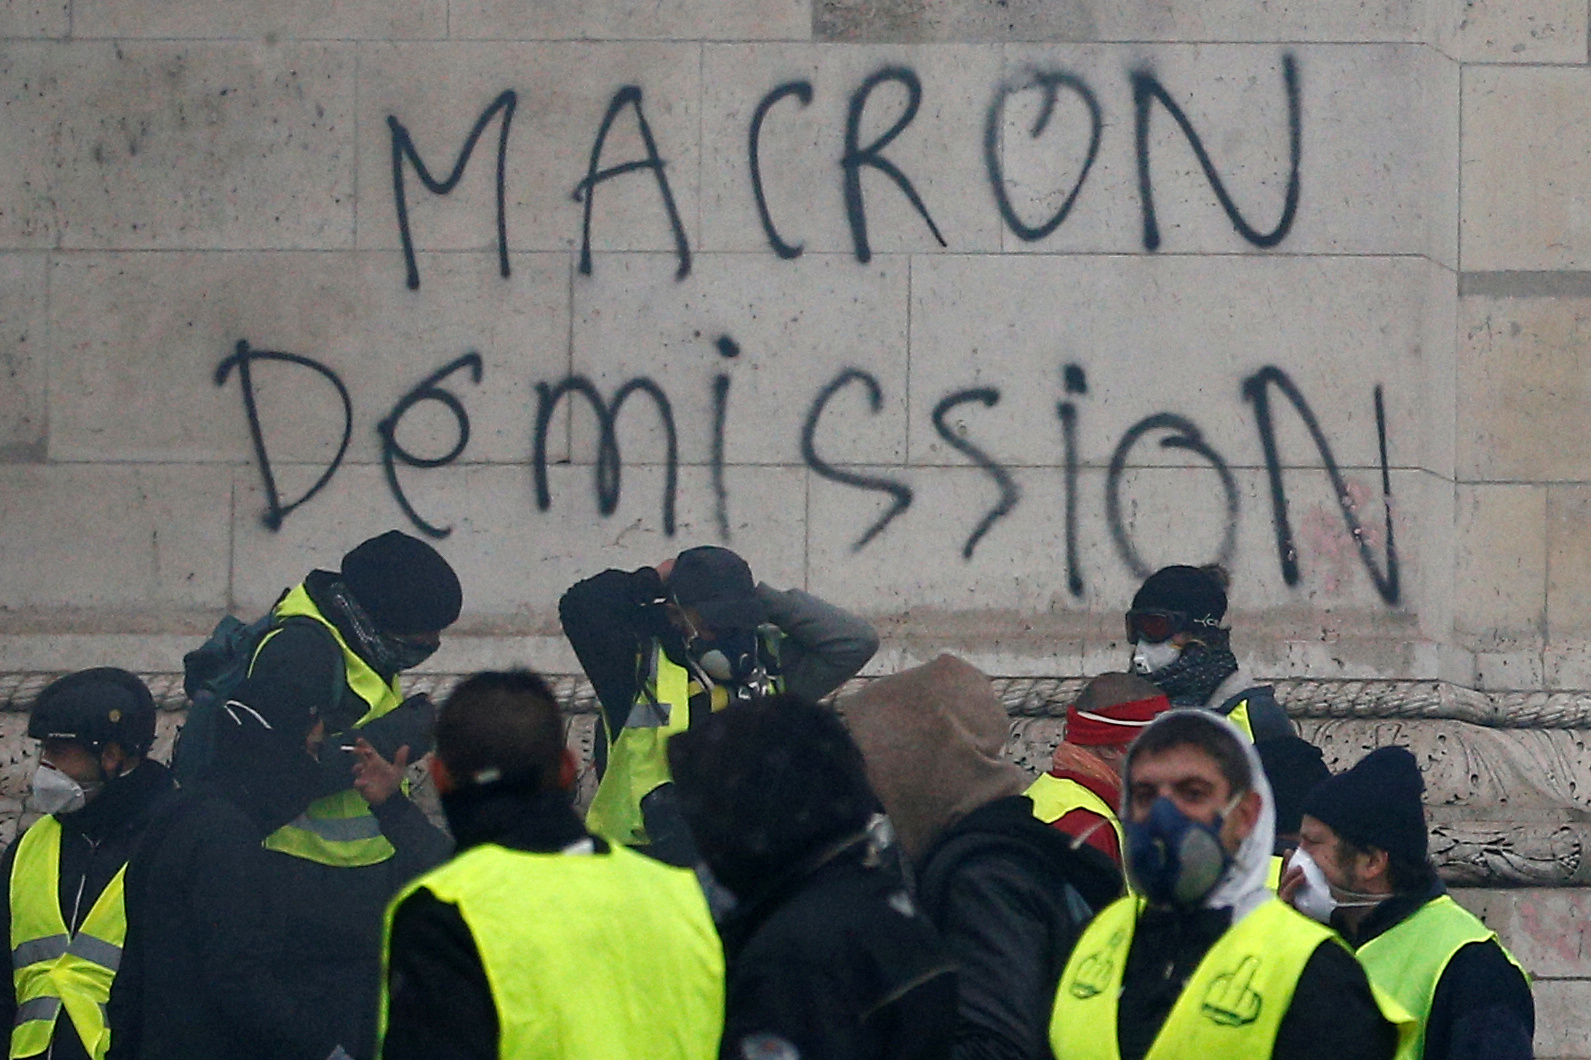 The message "Macron Resign" is seen on the Arc de Triomphe as protesters wearing yellow vests, a symbol of a drivers' protest against higher diesel taxes, demonstrate at the Place de l'Etoile in Paris, France, December 1, 2018. Picture taken Decembert 1, 2018. REUTERS/Stephane Mahe